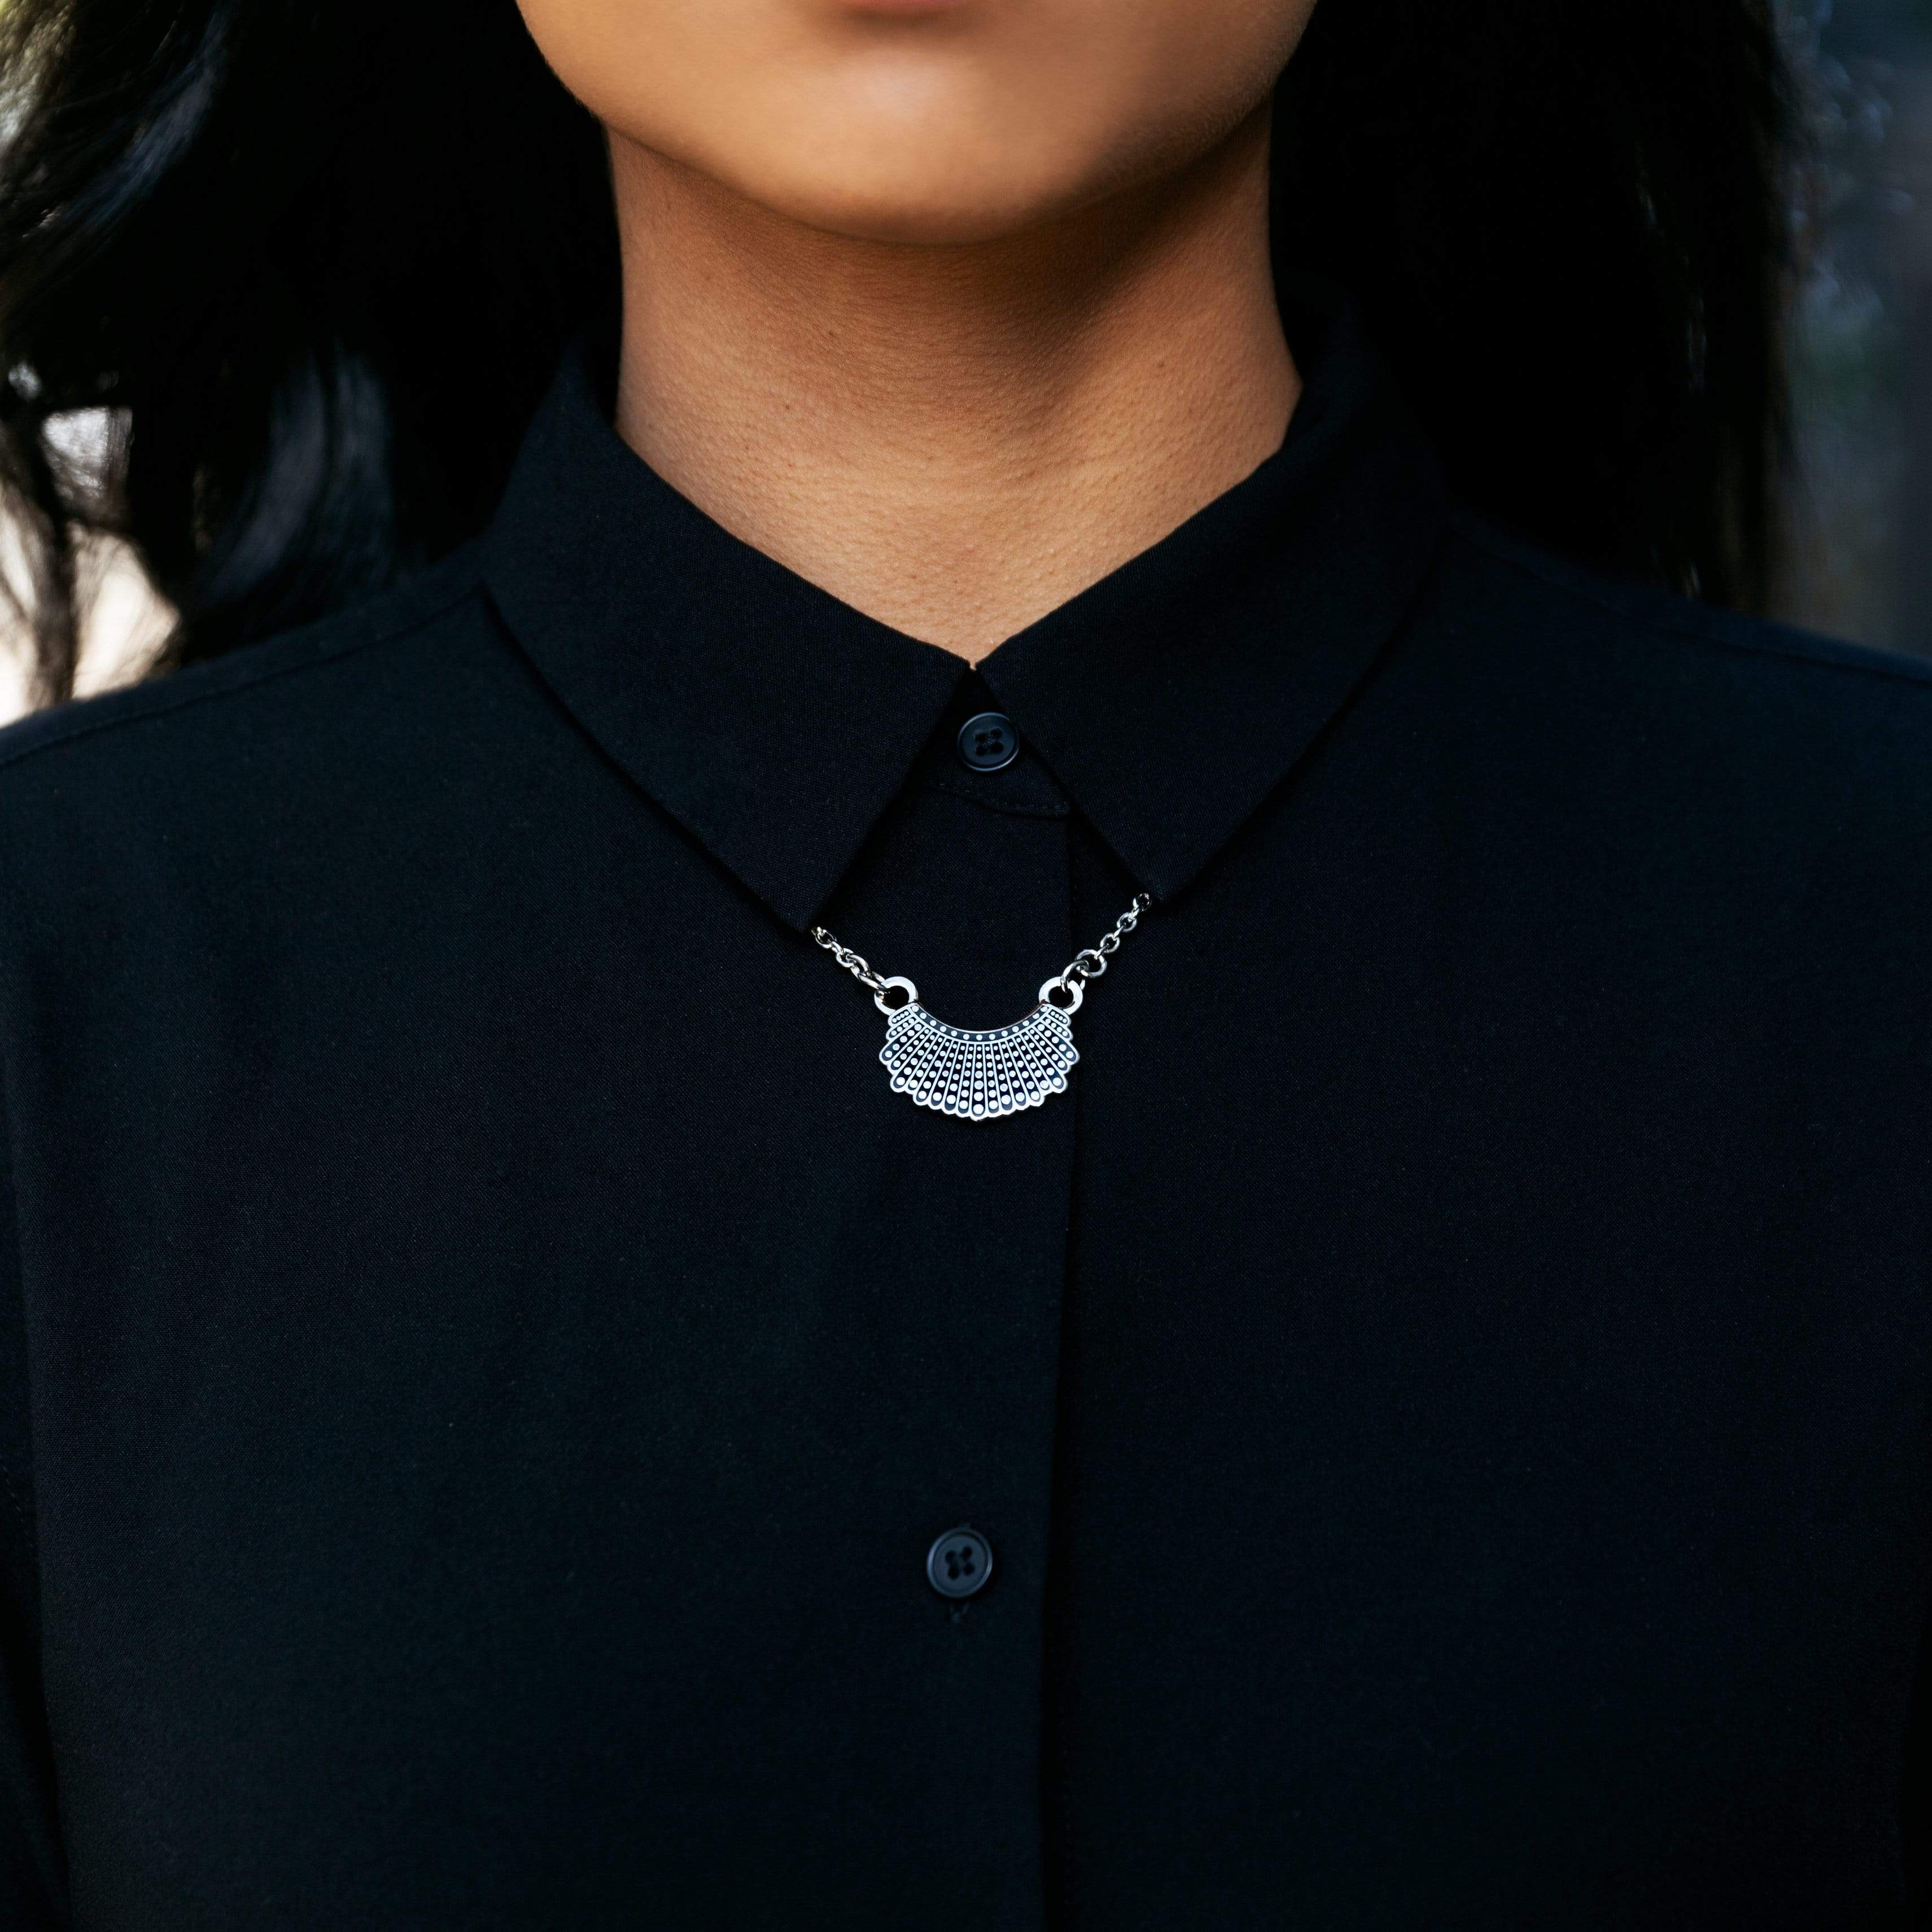 Dissent Collar Stud Earrings + Necklace (set)